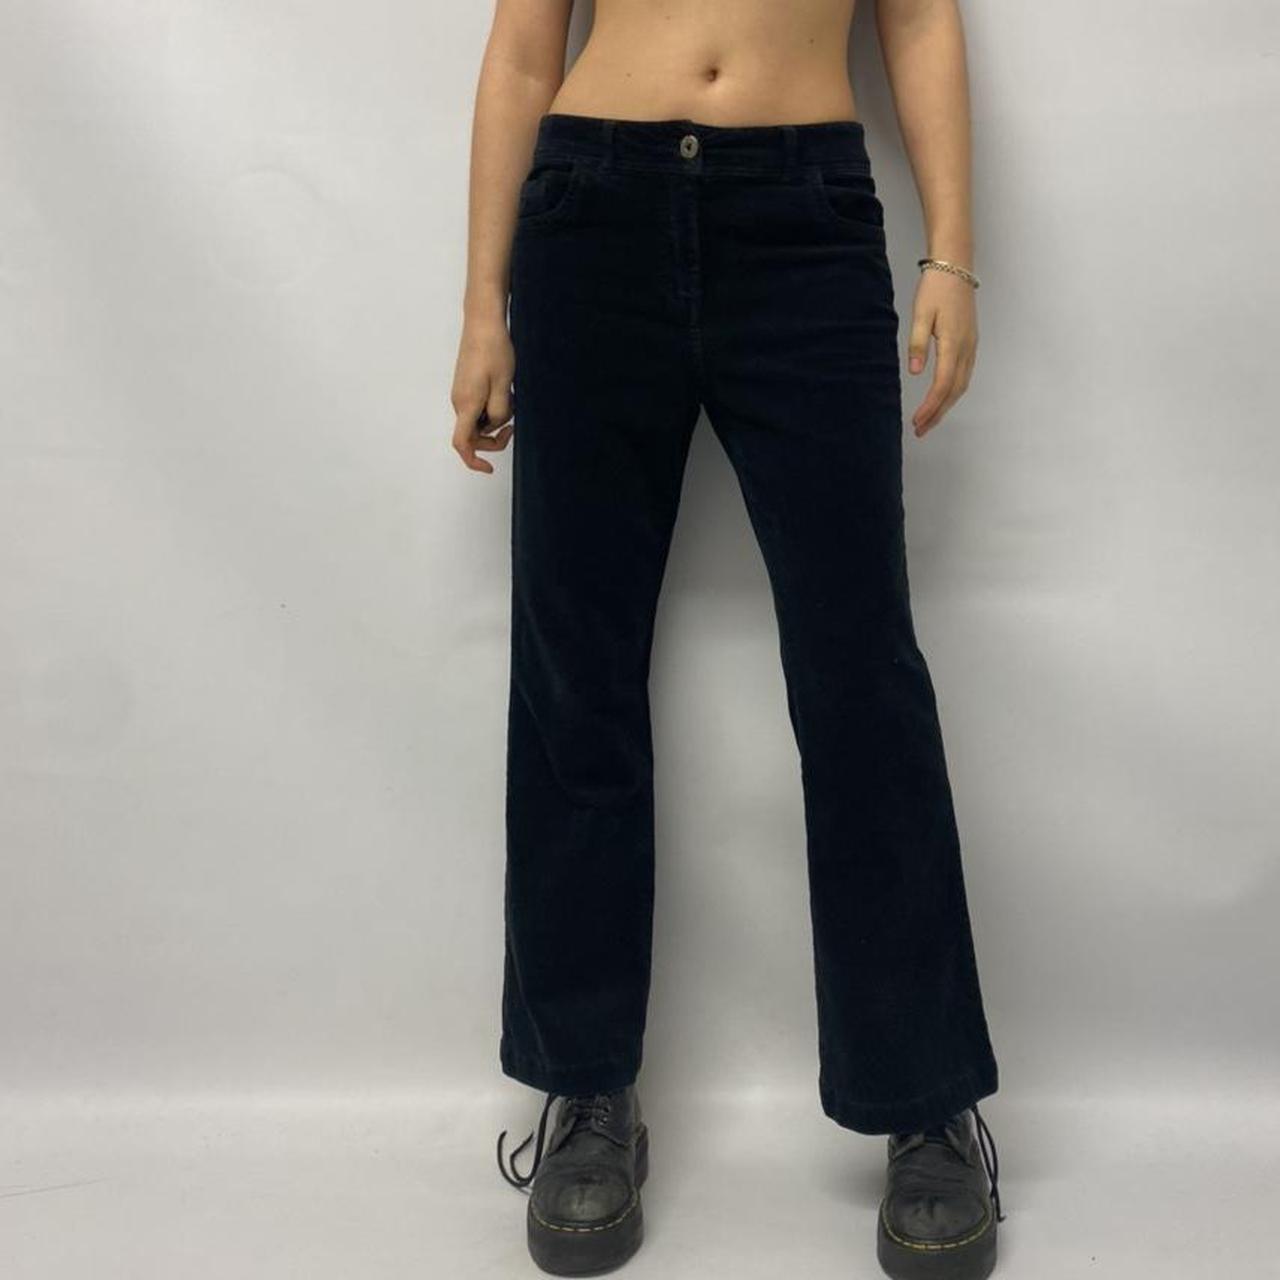 Cord vintage corduroy flares flare trousers flared... - Depop